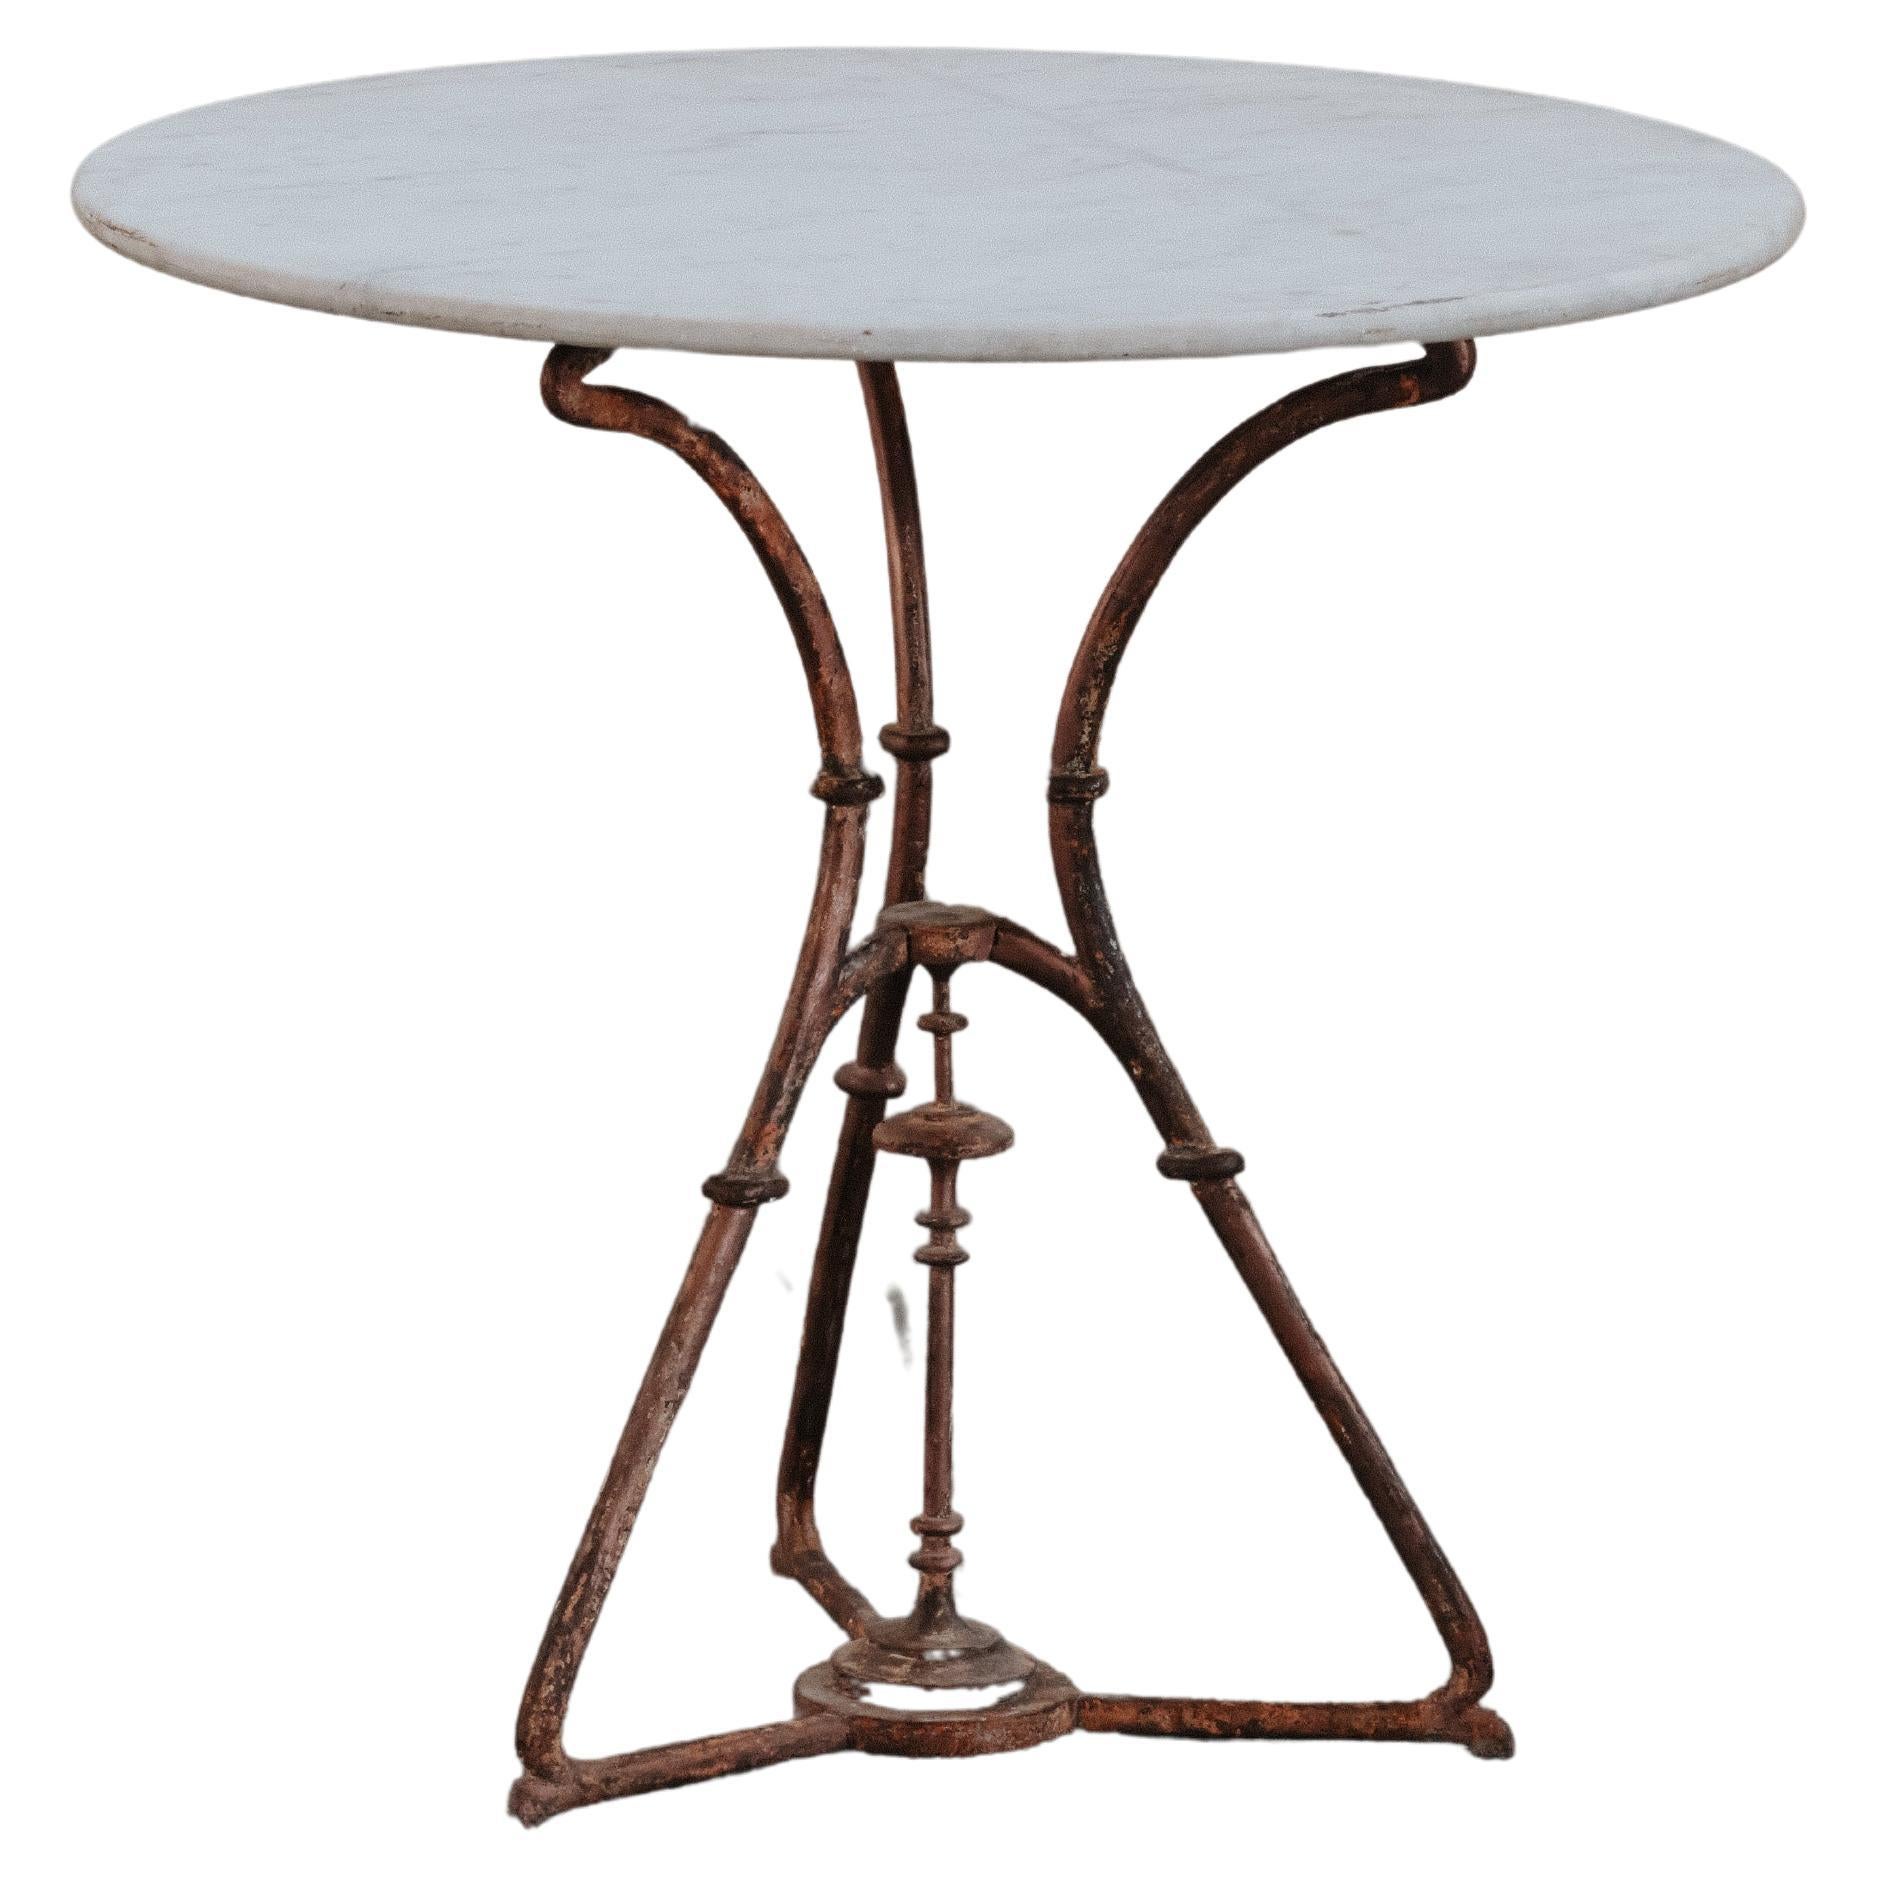 Vintage Stone Garden Table From France, Circa 1940 For Sale